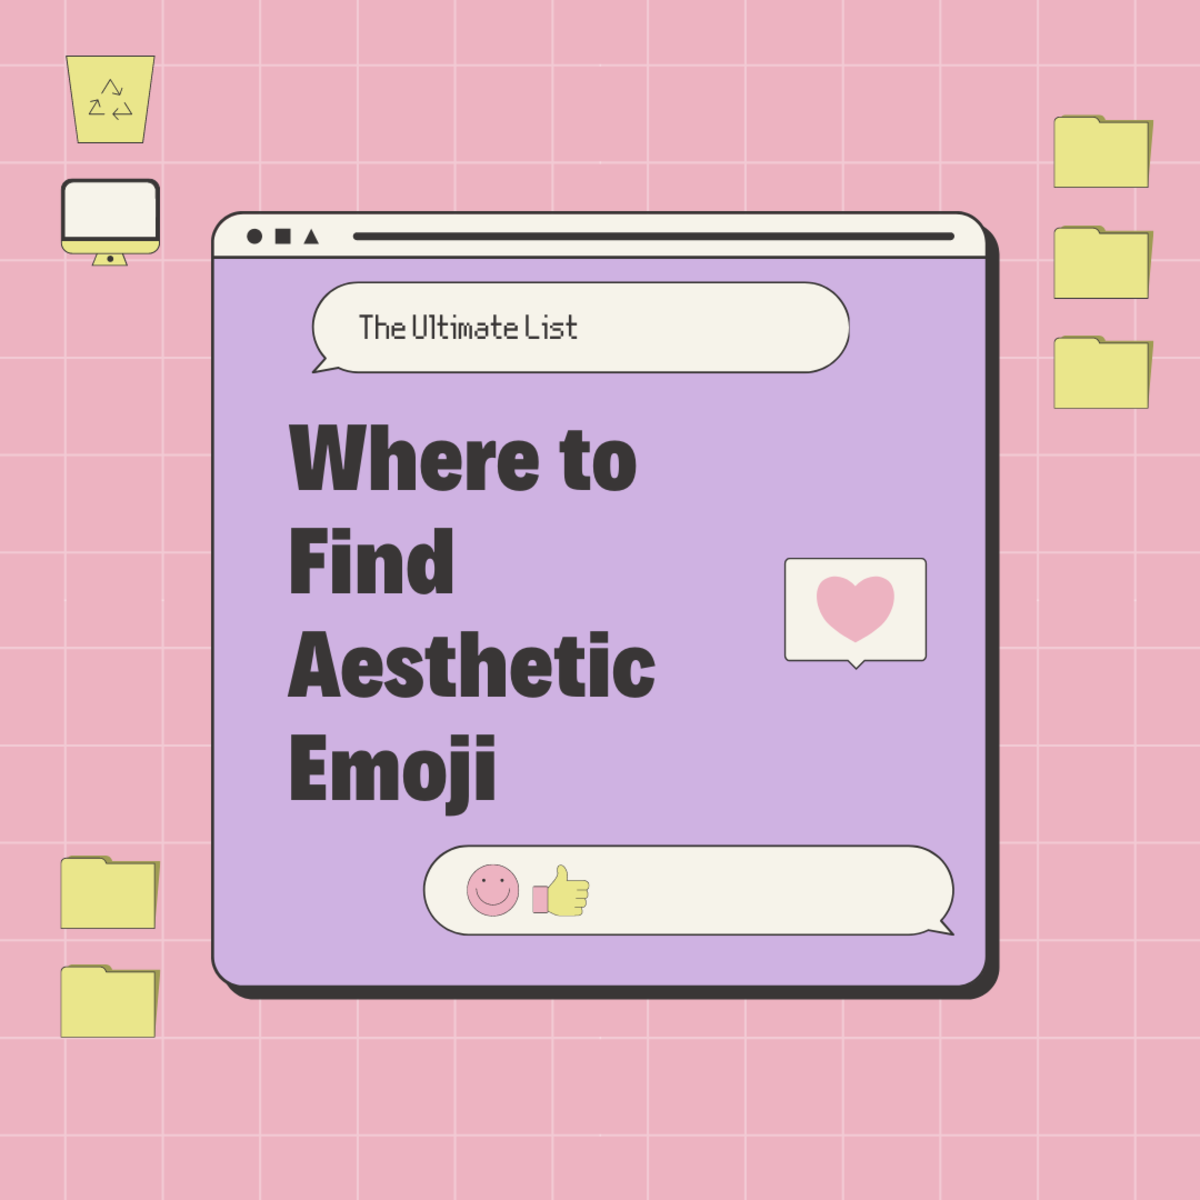 6 Sites That Have Aesthetic Emojis to Copy and Paste: The Ultimate List